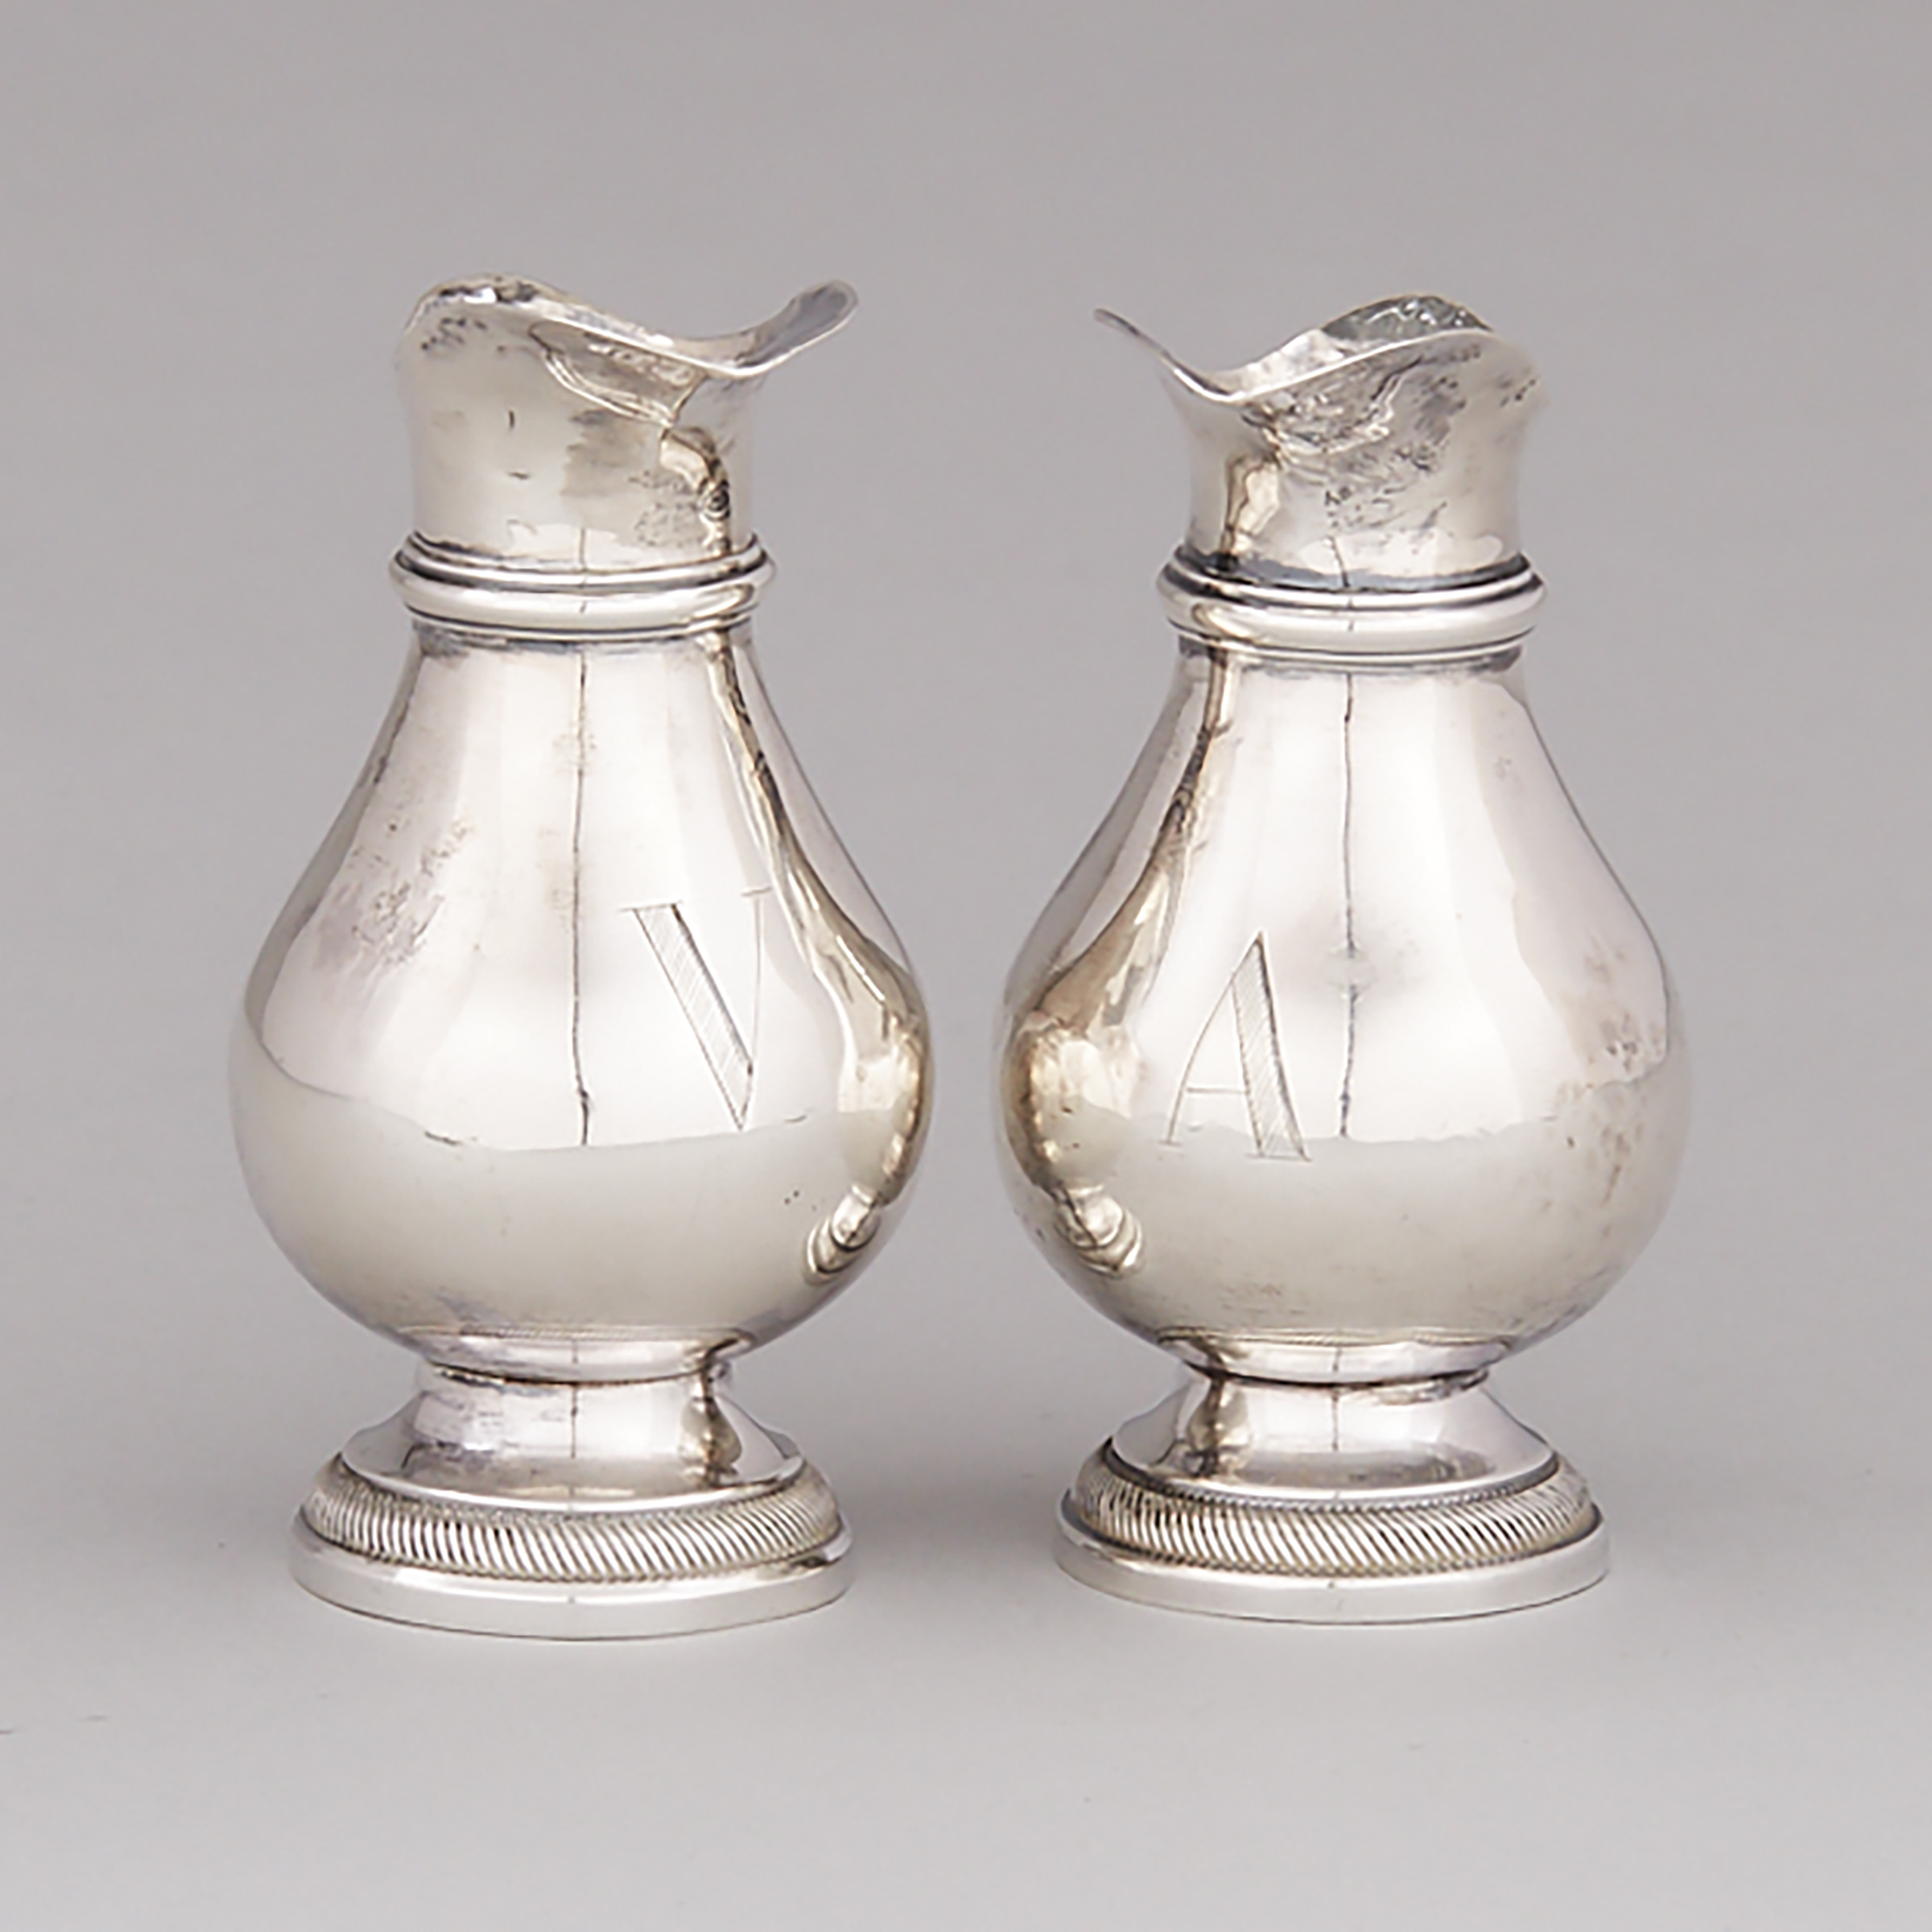 Pair of Silver Cruets, probably Canadian, 19th century